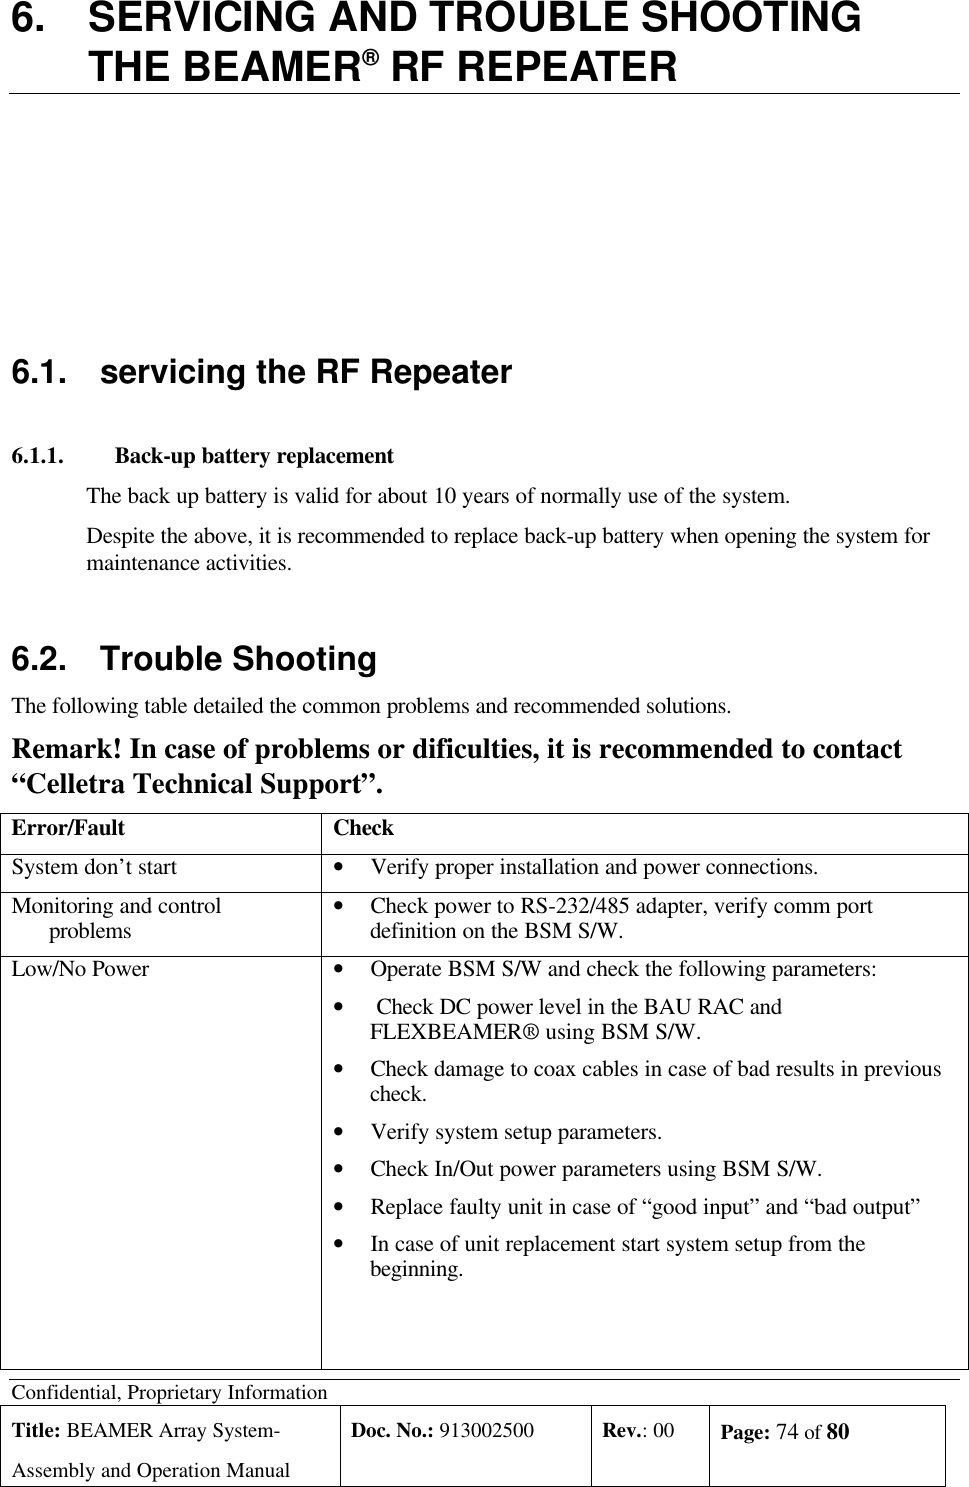 Confidential, Proprietary InformationTitle: BEAMER Array System-Assembly and Operation ManualDoc. No.: 913002500 Rev.: 00 Page: 74 of 806. SERVICING AND TROUBLE SHOOTINGTHE BEAMER® RF REPEATER6.1. servicing the RF Repeater6.1.1. Back-up battery replacementThe back up battery is valid for about 10 years of normally use of the system.Despite the above, it is recommended to replace back-up battery when opening the system formaintenance activities.6.2.  Trouble ShootingThe following table detailed the common problems and recommended solutions.Remark! In case of problems or dificulties, it is recommended to contact“Celletra Technical Support”.Error/Fault CheckSystem don’t start • Verify proper installation and power connections.Monitoring and controlproblems • Check power to RS-232/485 adapter, verify comm portdefinition on the BSM S/W.Low/No Power • Operate BSM S/W and check the following parameters:•  Check DC power level in the BAU RAC andFLEXBEAMER® using BSM S/W.• Check damage to coax cables in case of bad results in previouscheck.• Verify system setup parameters.• Check In/Out power parameters using BSM S/W.• Replace faulty unit in case of “good input” and “bad output”• In case of unit replacement start system setup from thebeginning.